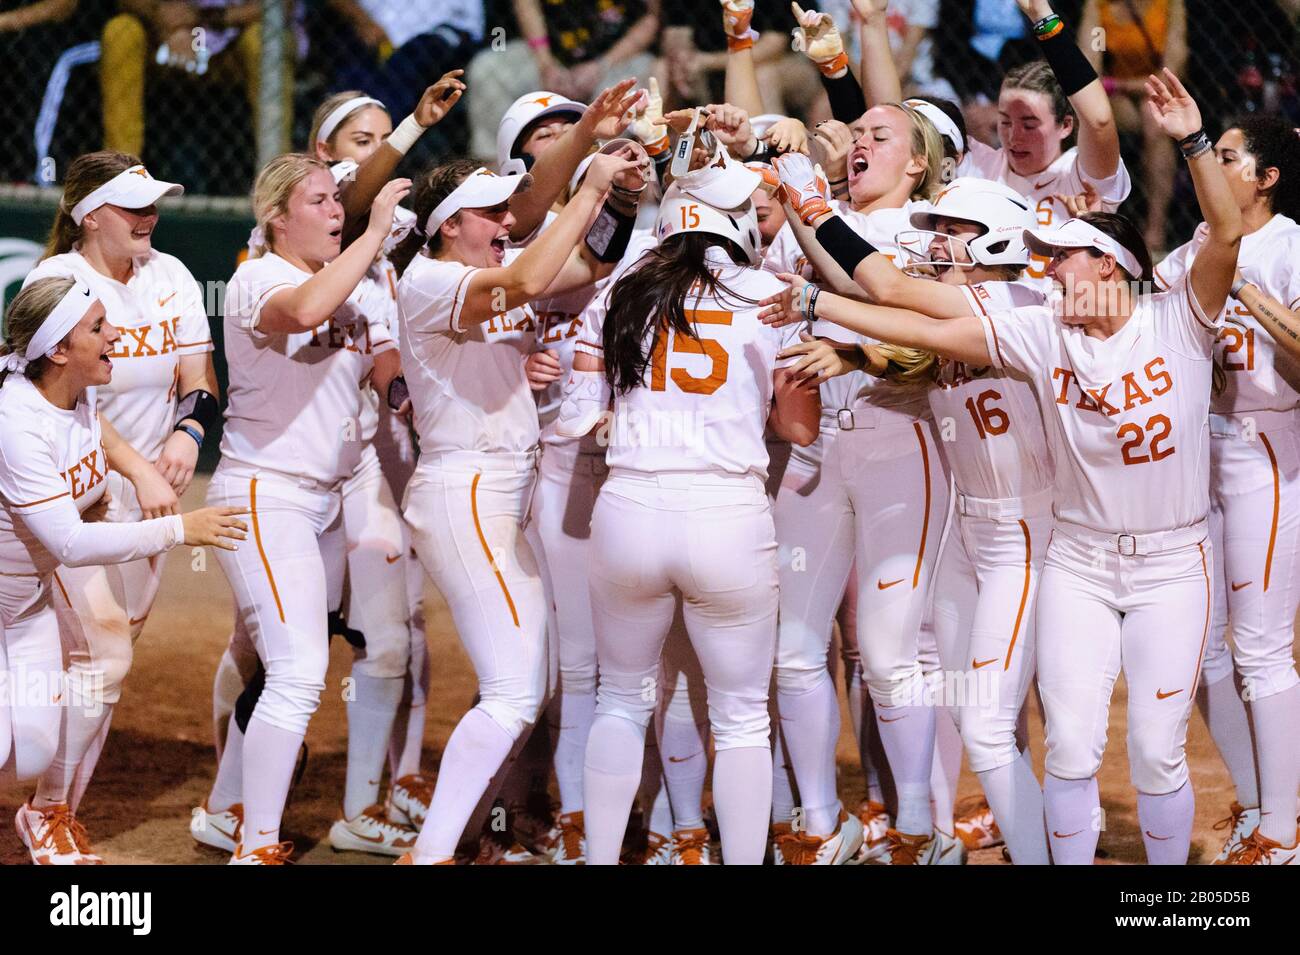 The Texas longhorns Womens Softball Team Celebrates Courtney Day's Home Run at Home Plate. Stock Photo